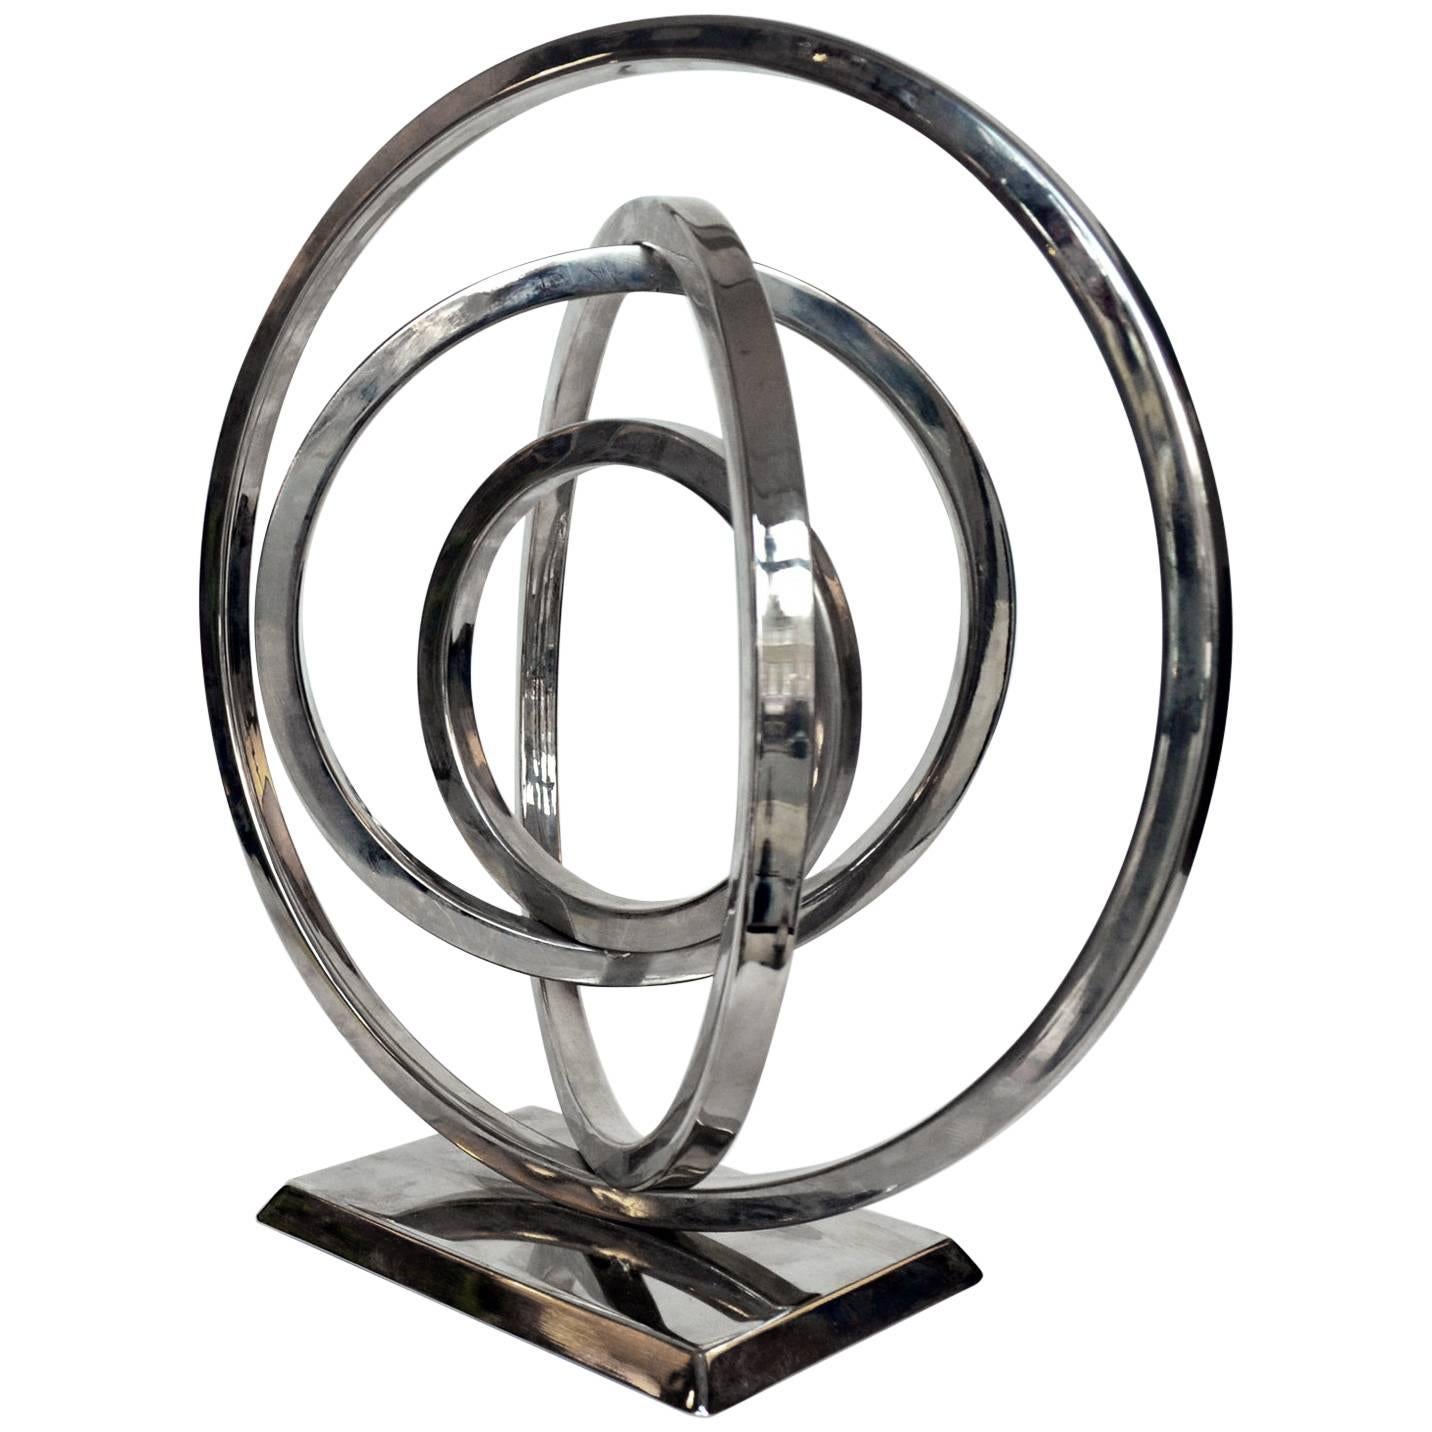 Abstract Sculpture of Rings in Chrome Metal